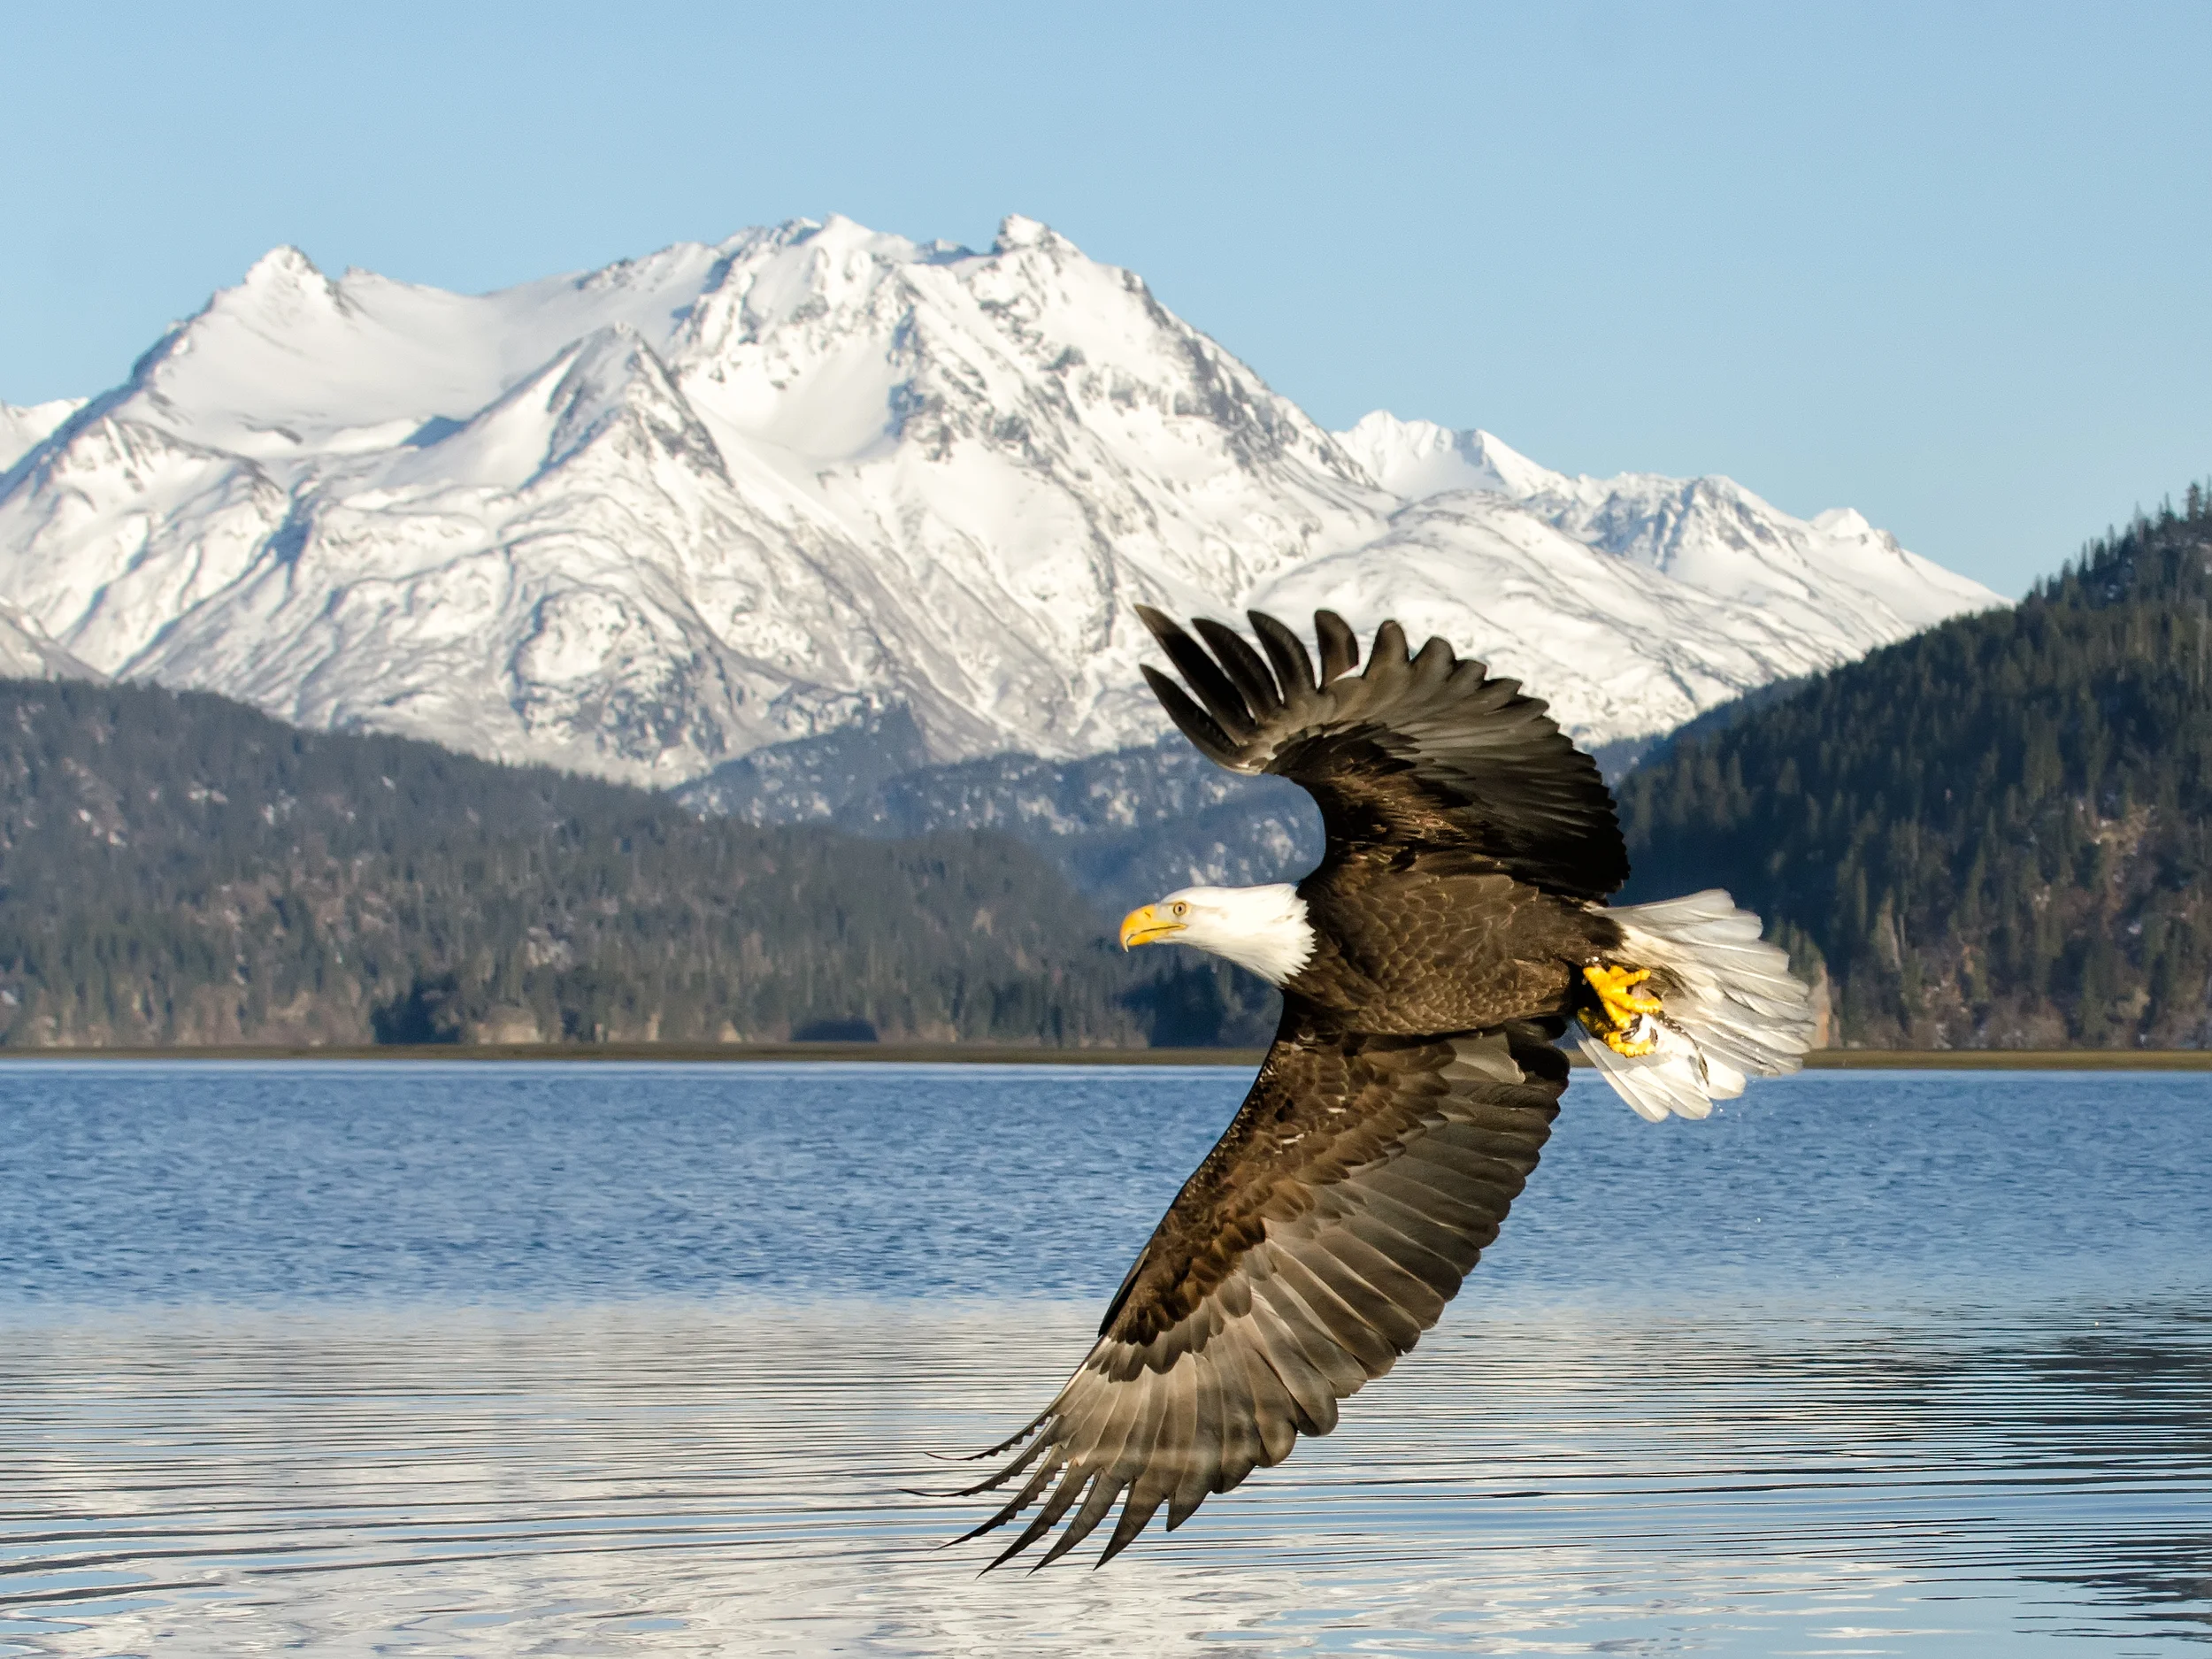 Bald eagle flying above lake by mountains in Homer, Alaska